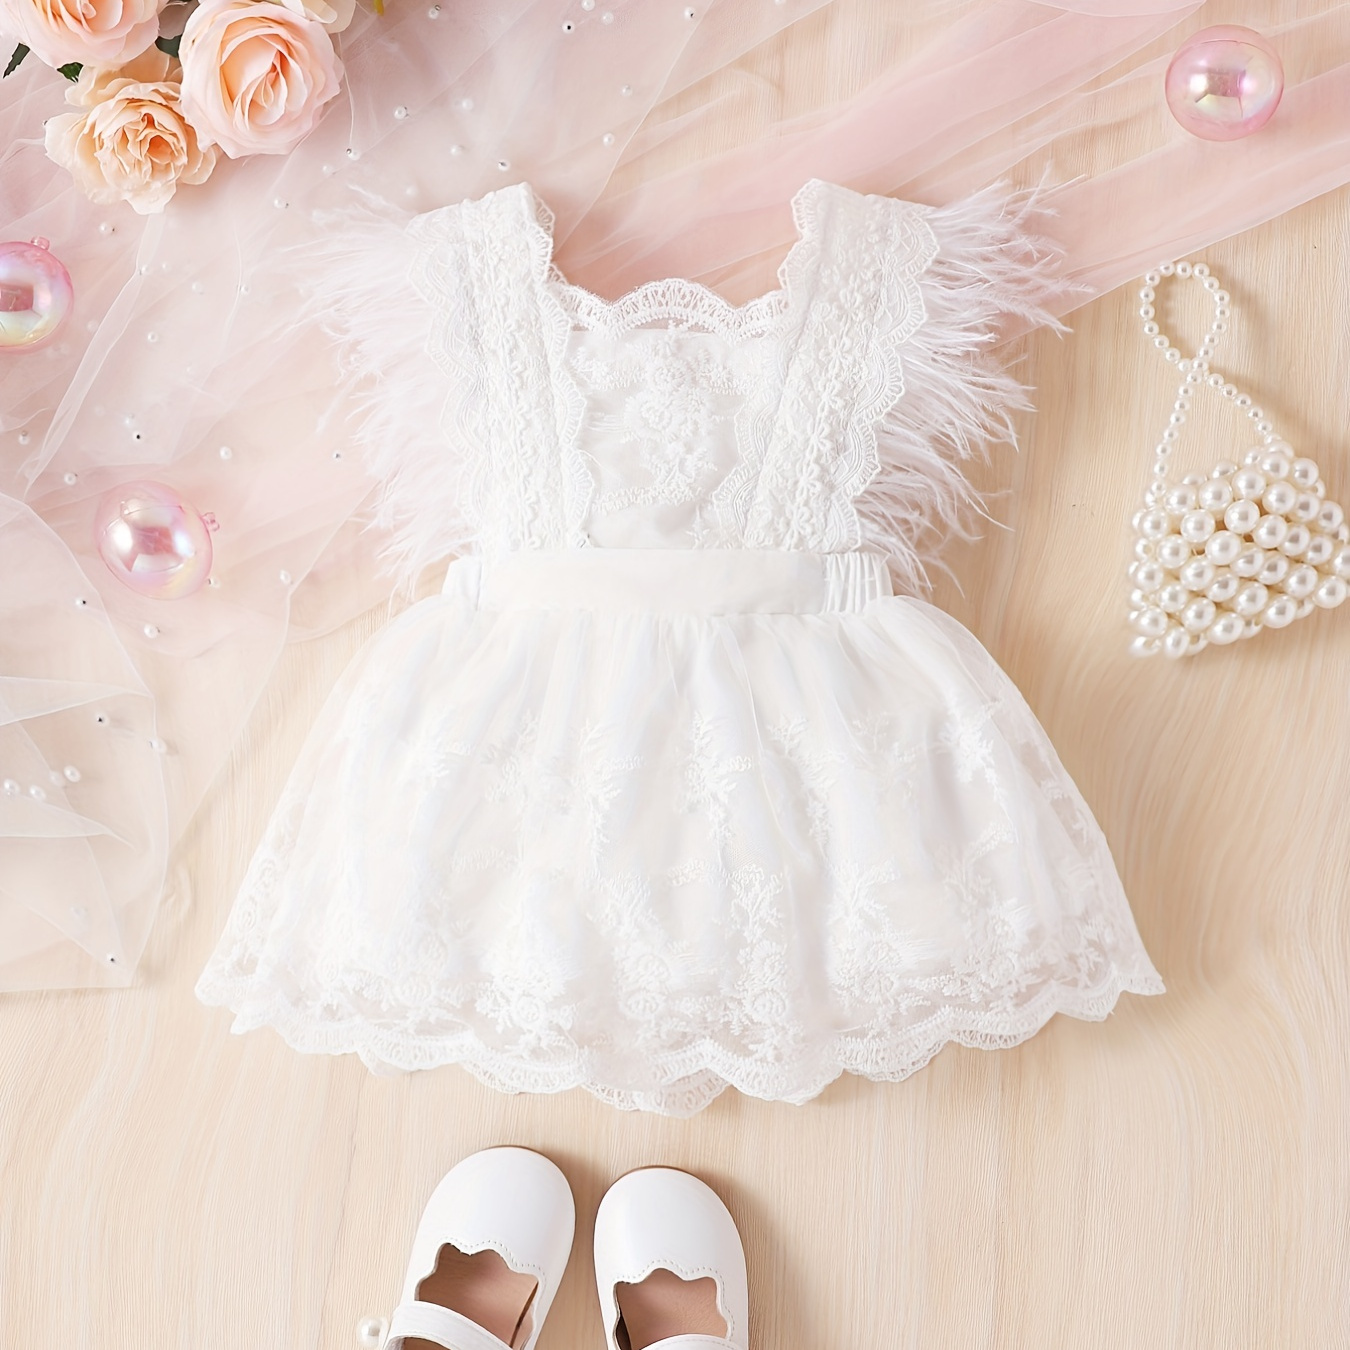 

Infant & Toddler's Feather Decor Lace Dress, Fairy Sleeveless Princess Dress, Baby Girl's Clothing For Summer/spring, As Gift